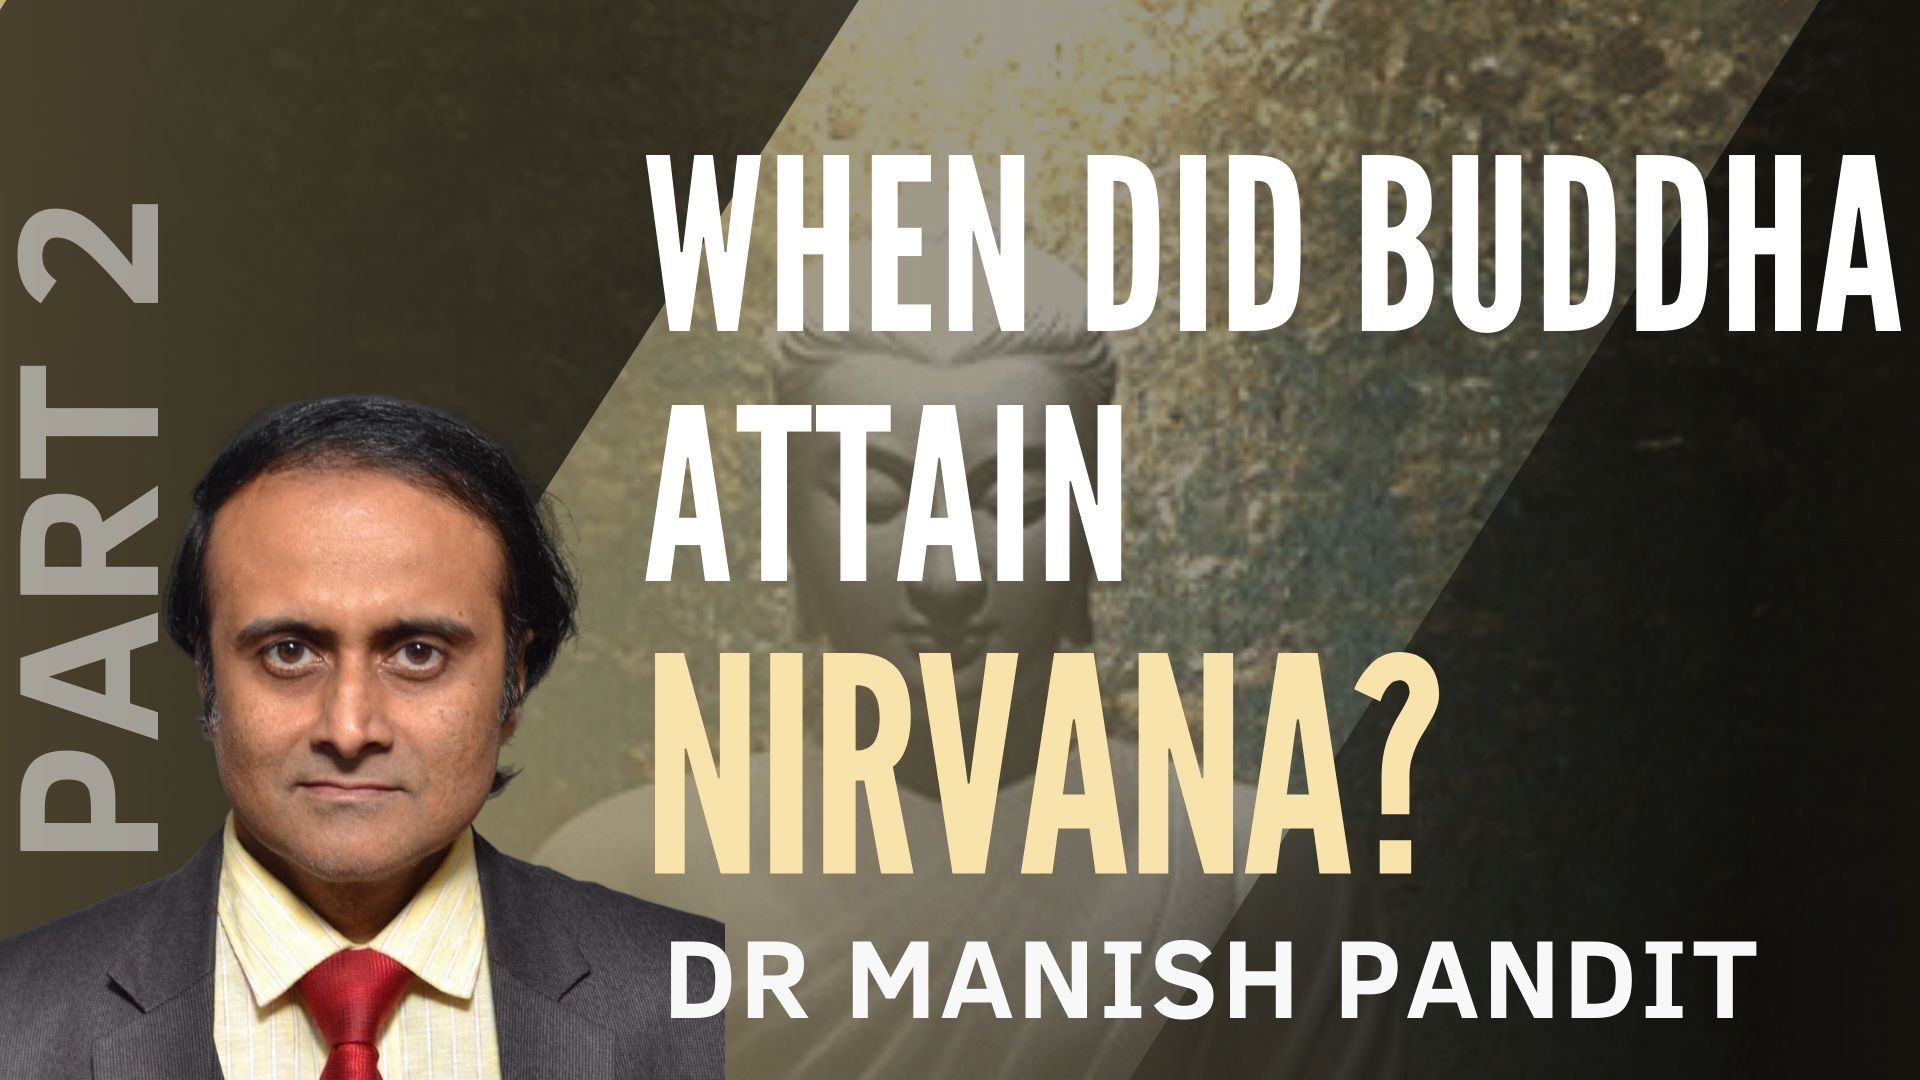 By systematic elimination of the various possible dates that satisfied a set of conditions, Dr Manish Pandit arrives at the date when Gautam Buddha attained Nirvana. The findings also satisfy the new data unearthed in Lumbini, Nepal. A must watch!